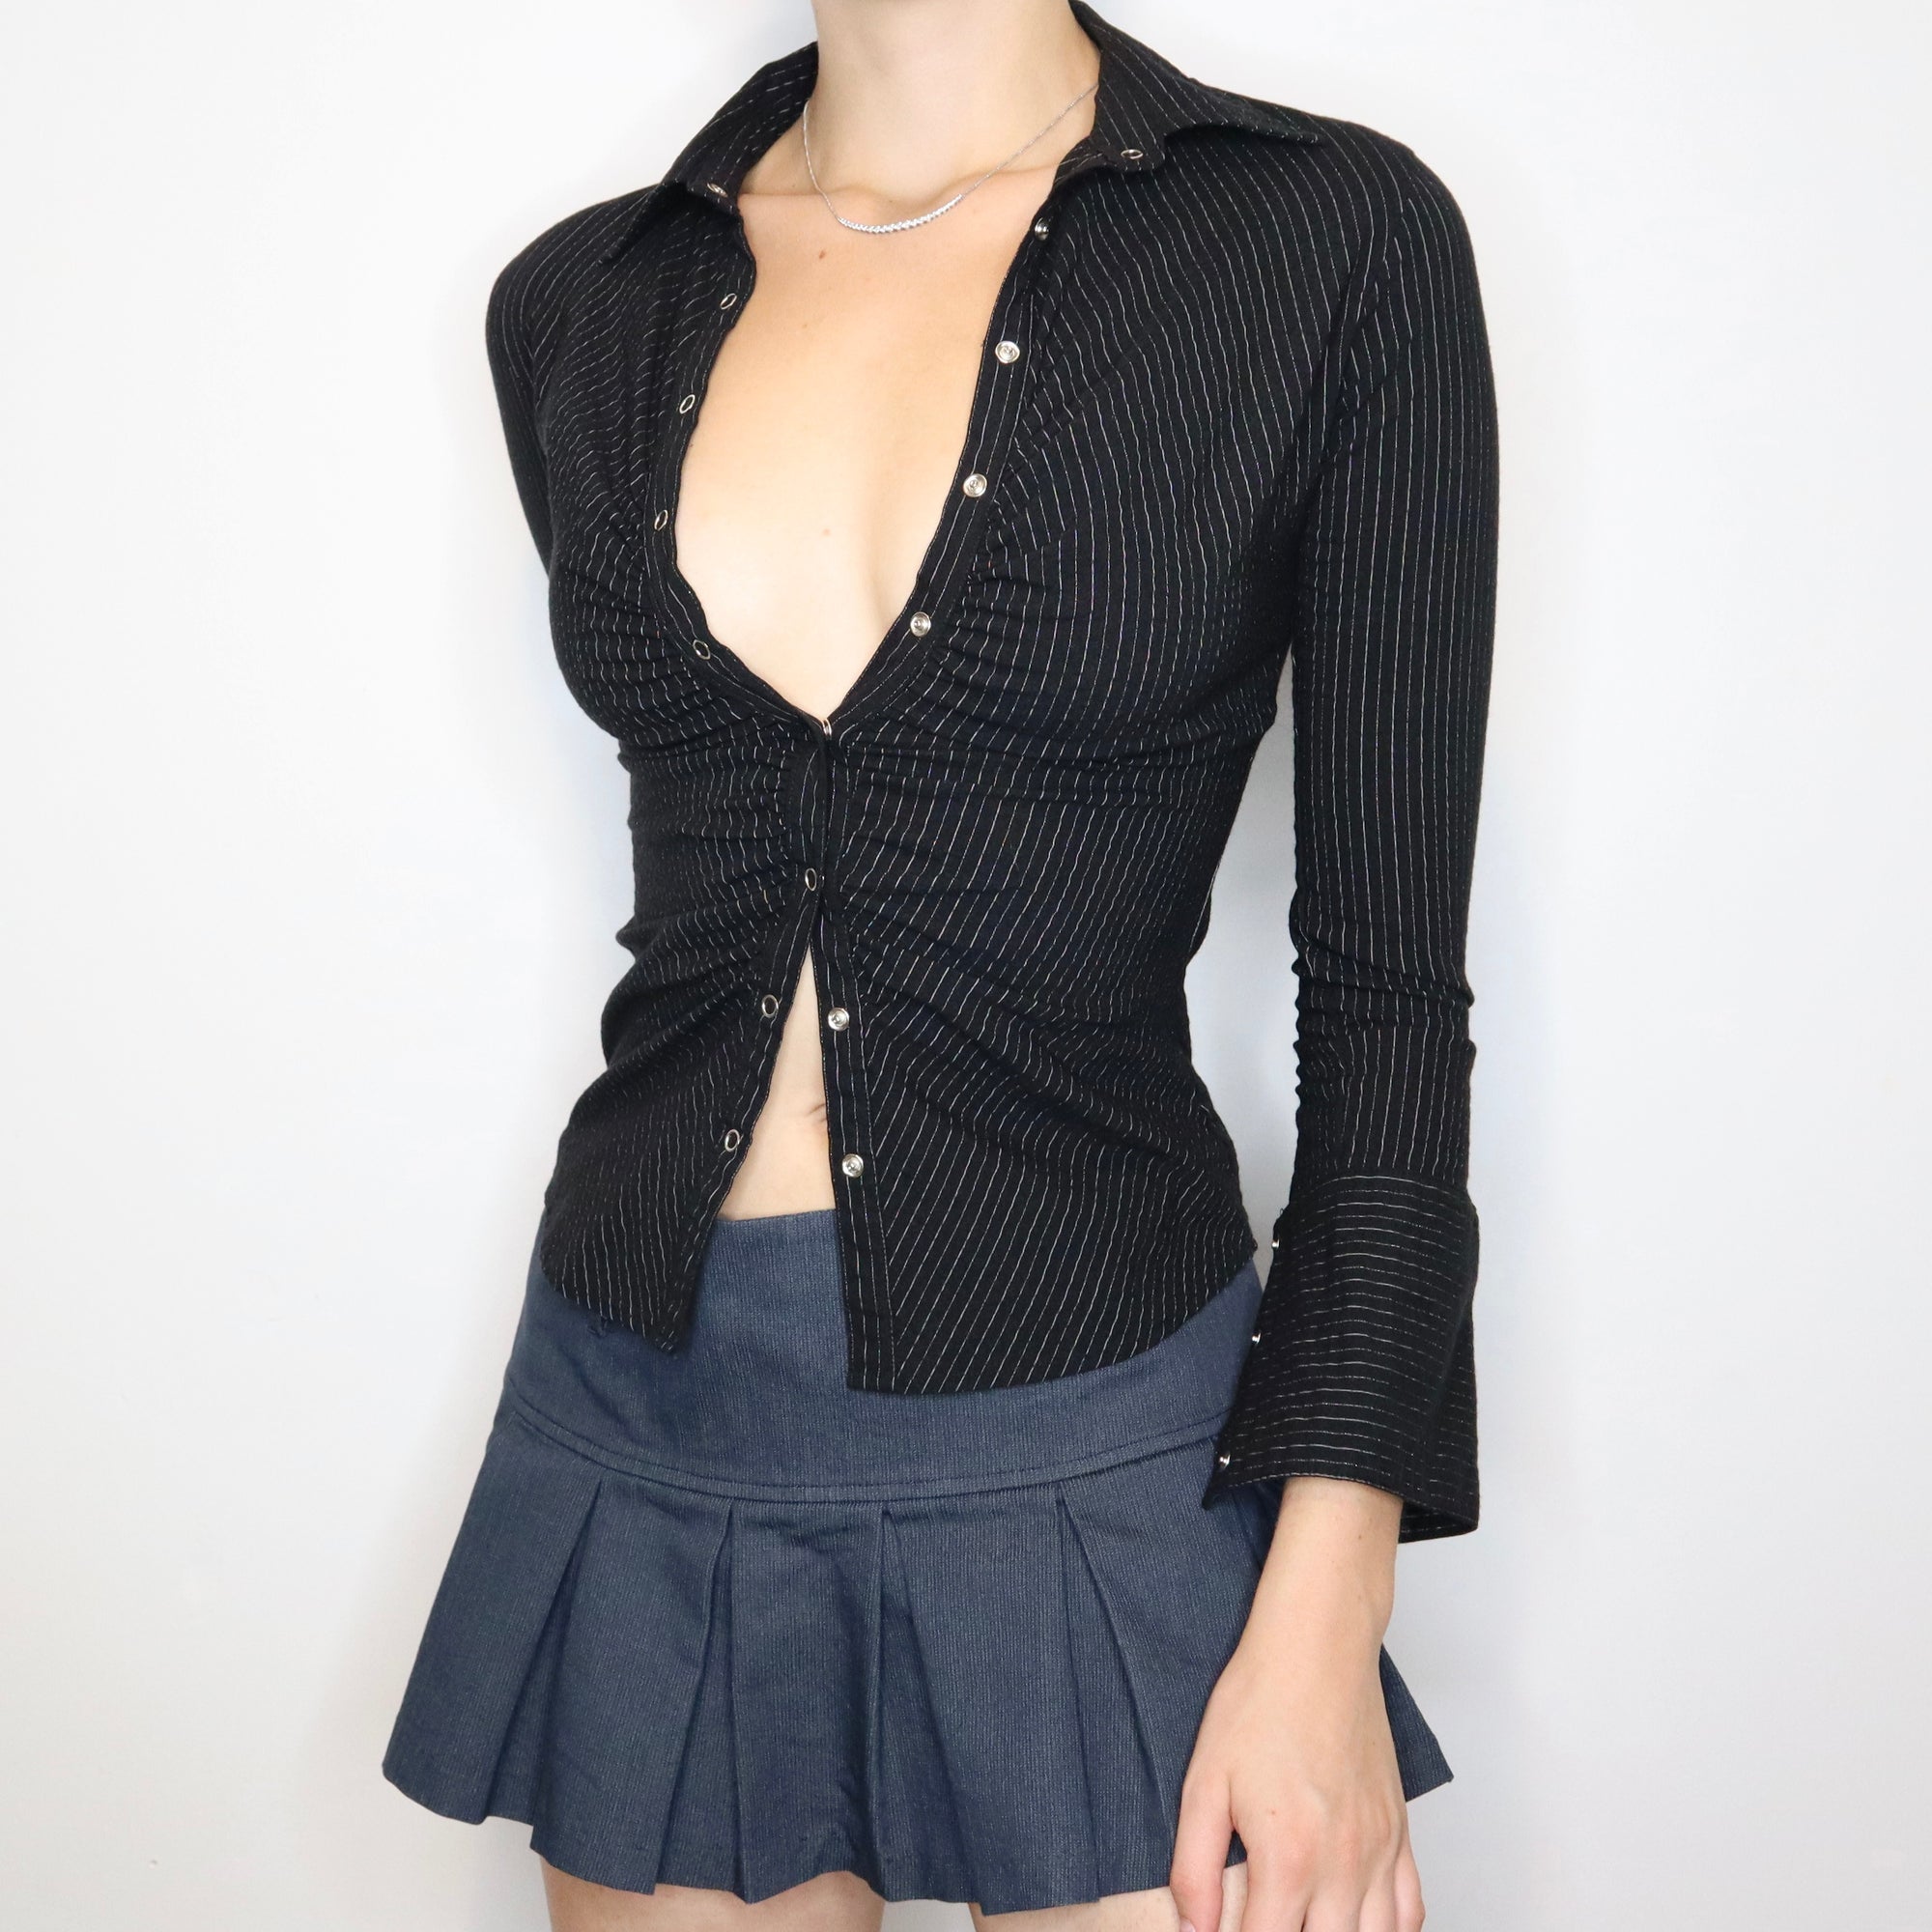 Vintage Early 2000s Black Pinstripe Button-Up Blouse